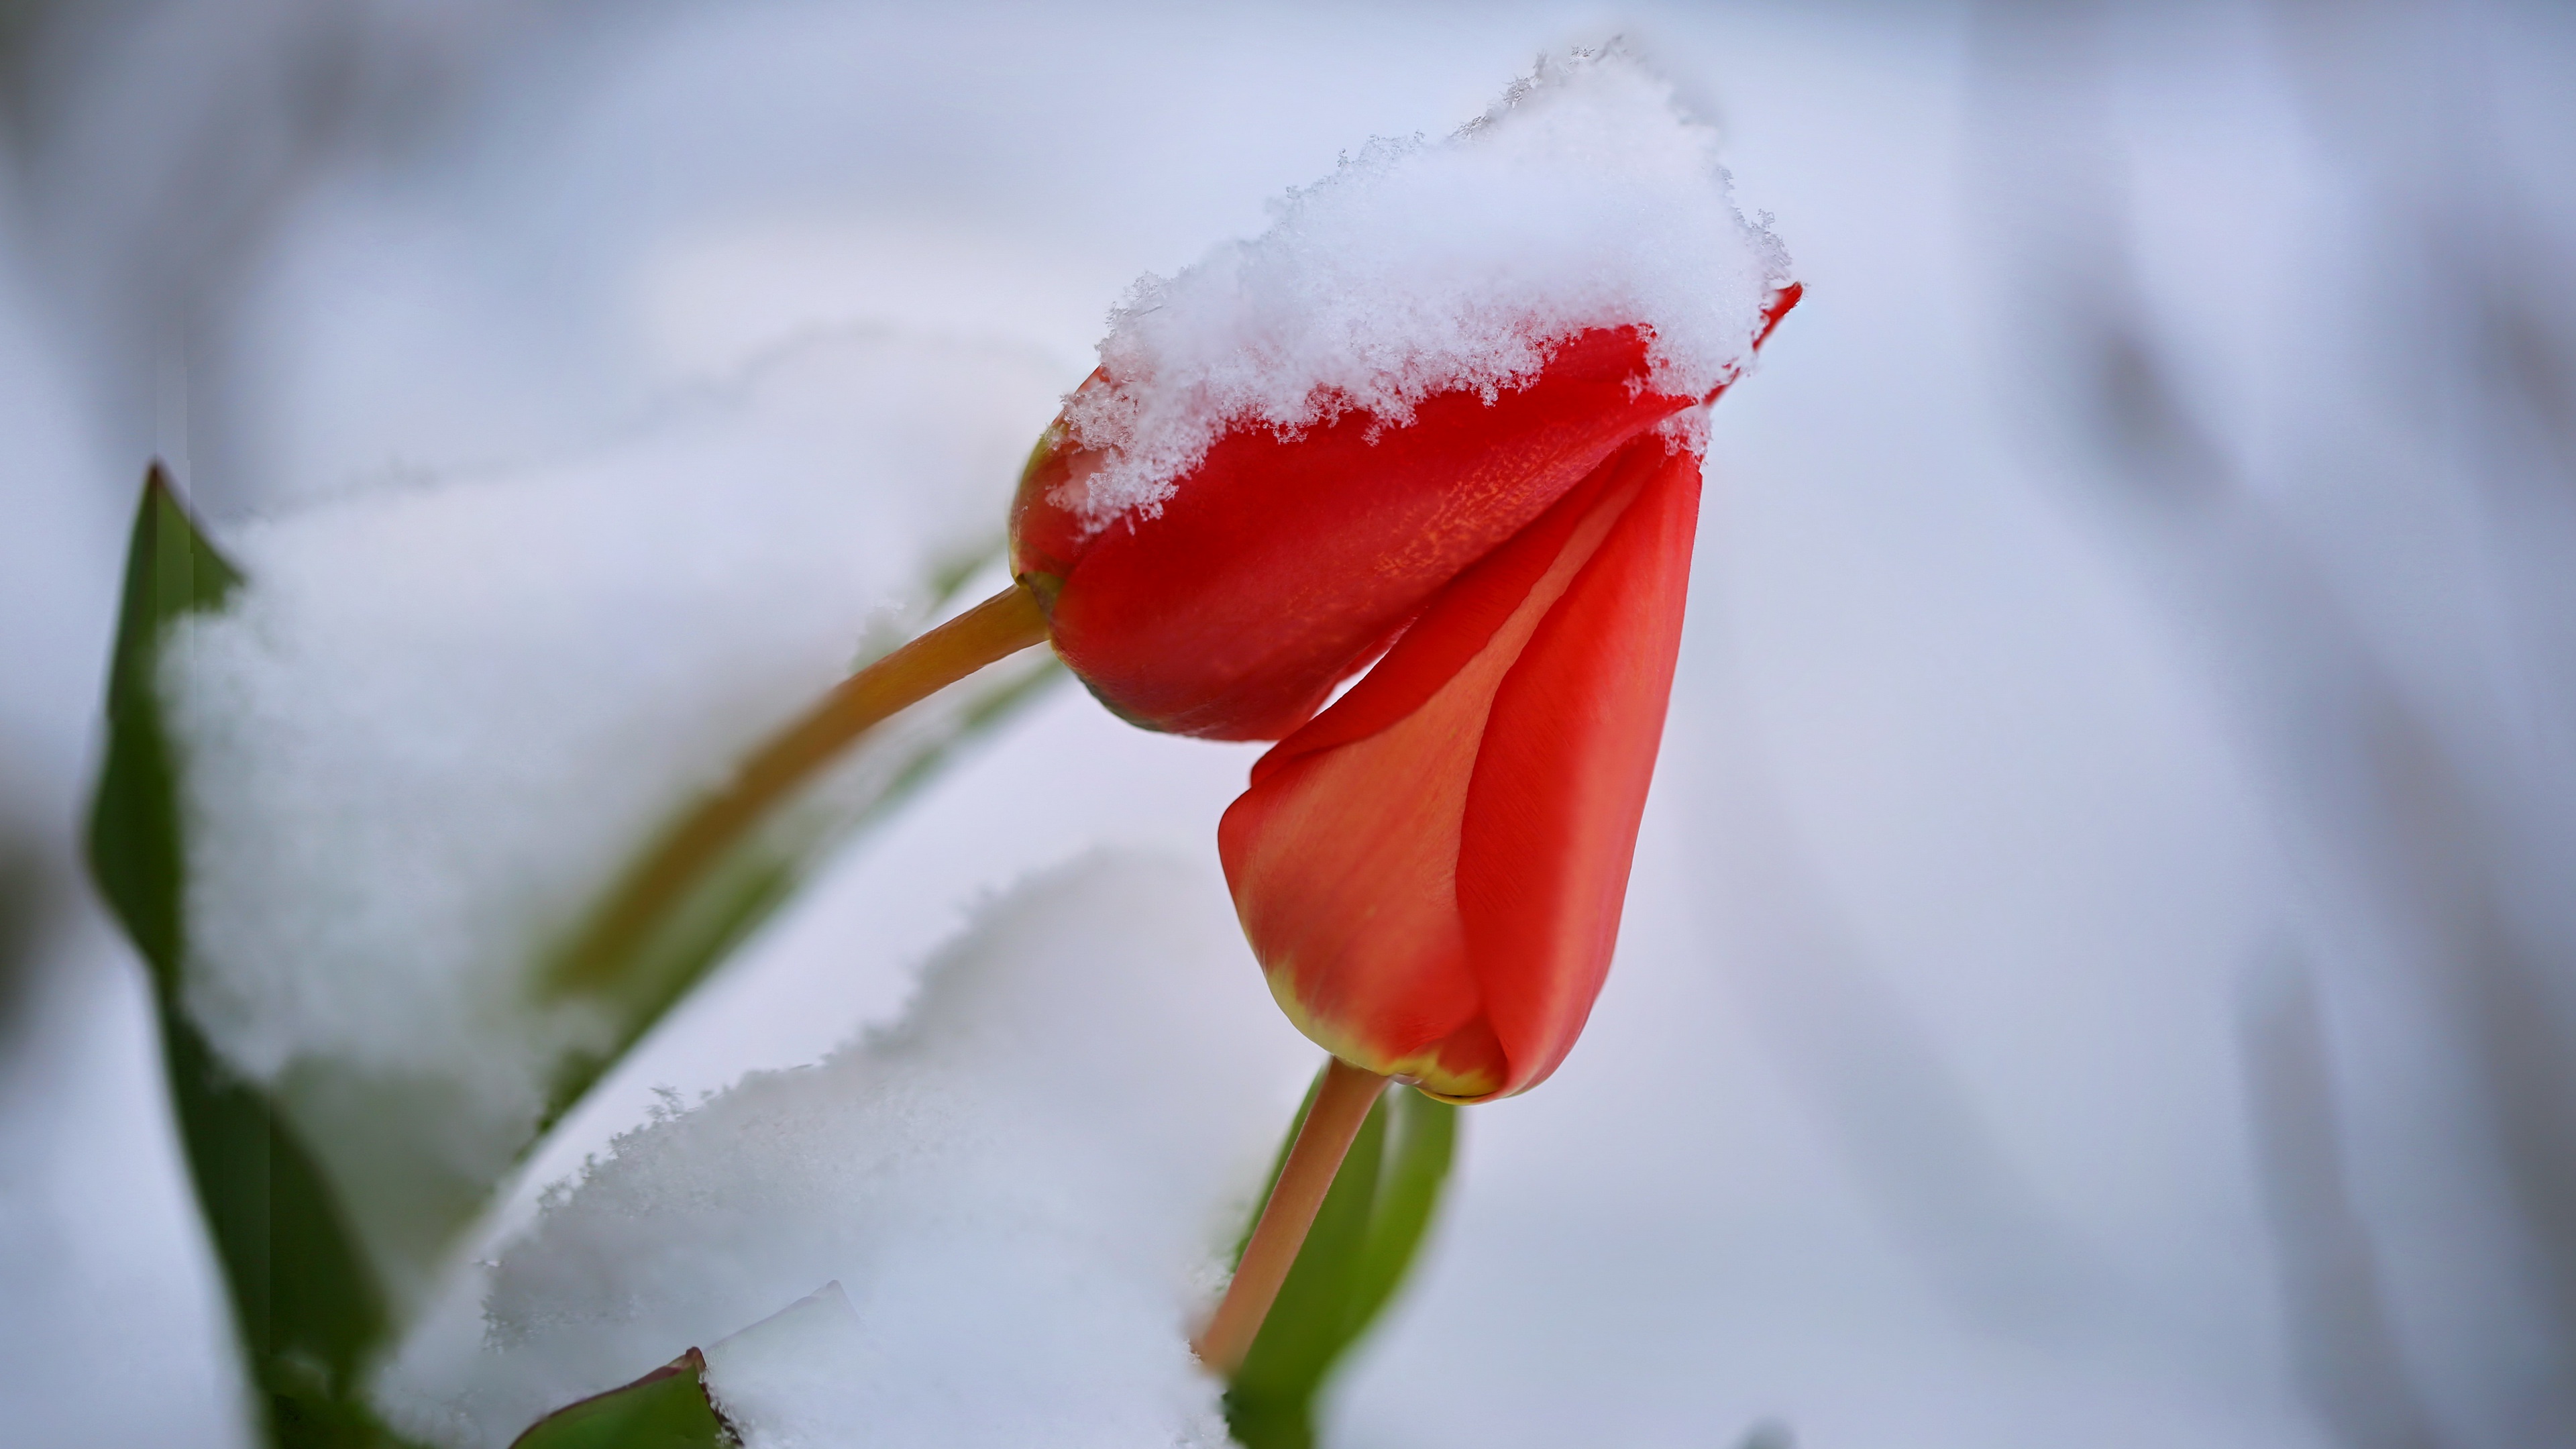 General 3840x2160 flowers snow plants red flowers tulips closeup